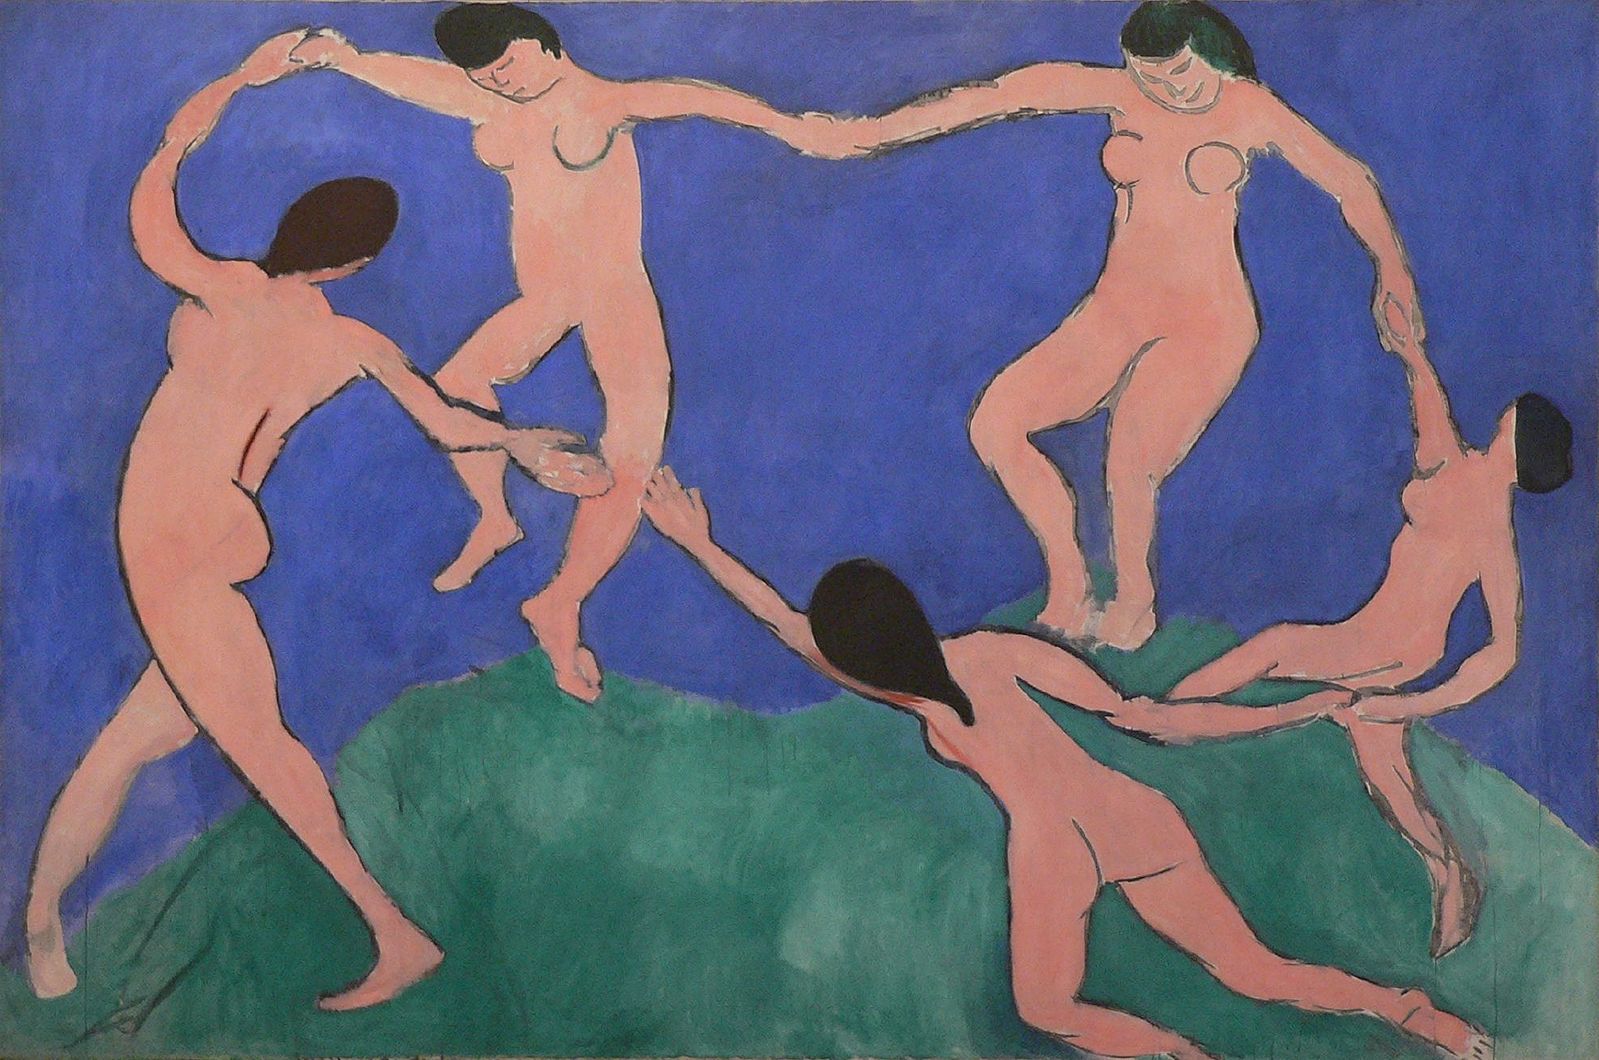 Five nude woman holding hands in a circle dancing on a green surface